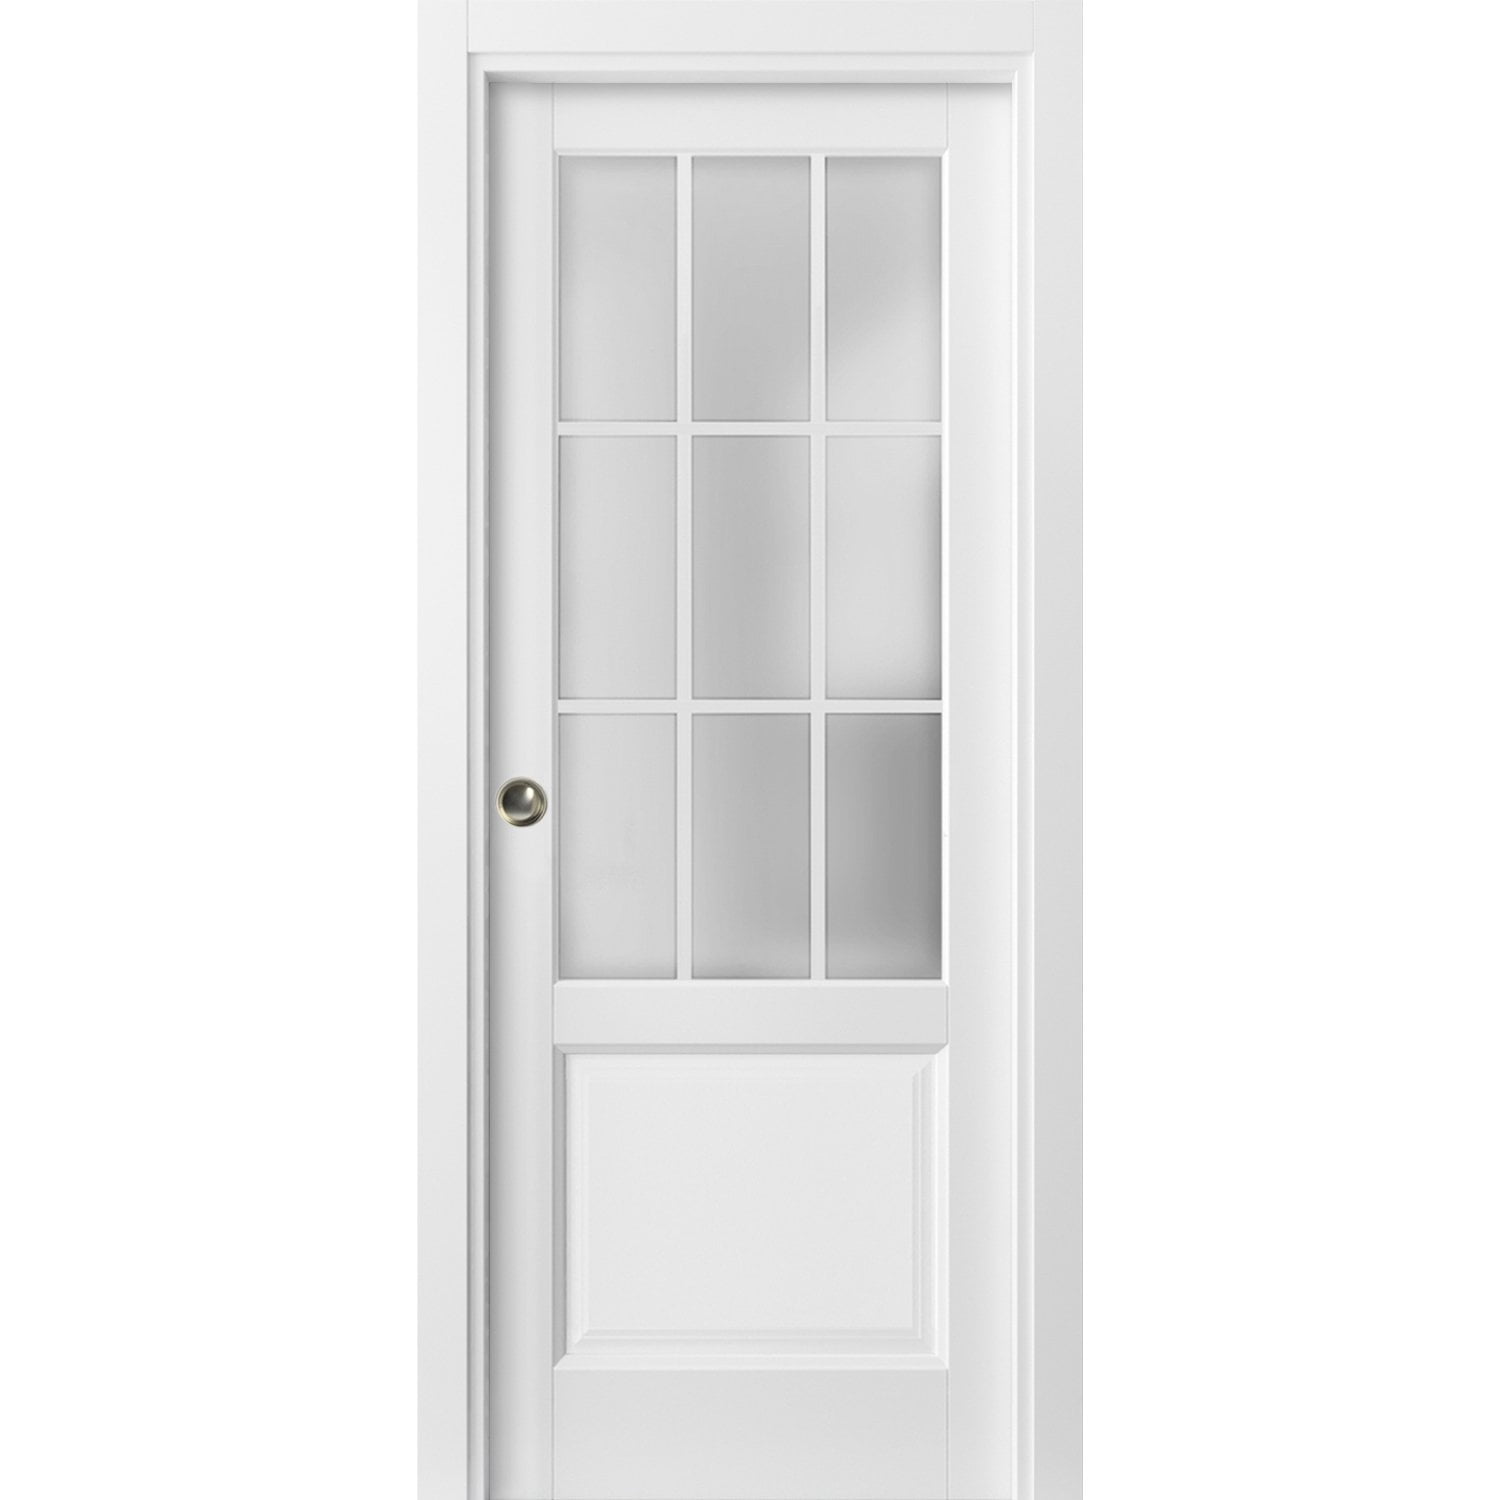 Sliding French Pocket Door 36 x 84 inches with Frosted Glass 9 Lites |  Felicia 3309 Matte White | Kit Trims Rail Hardware | Solid Wood Interior 